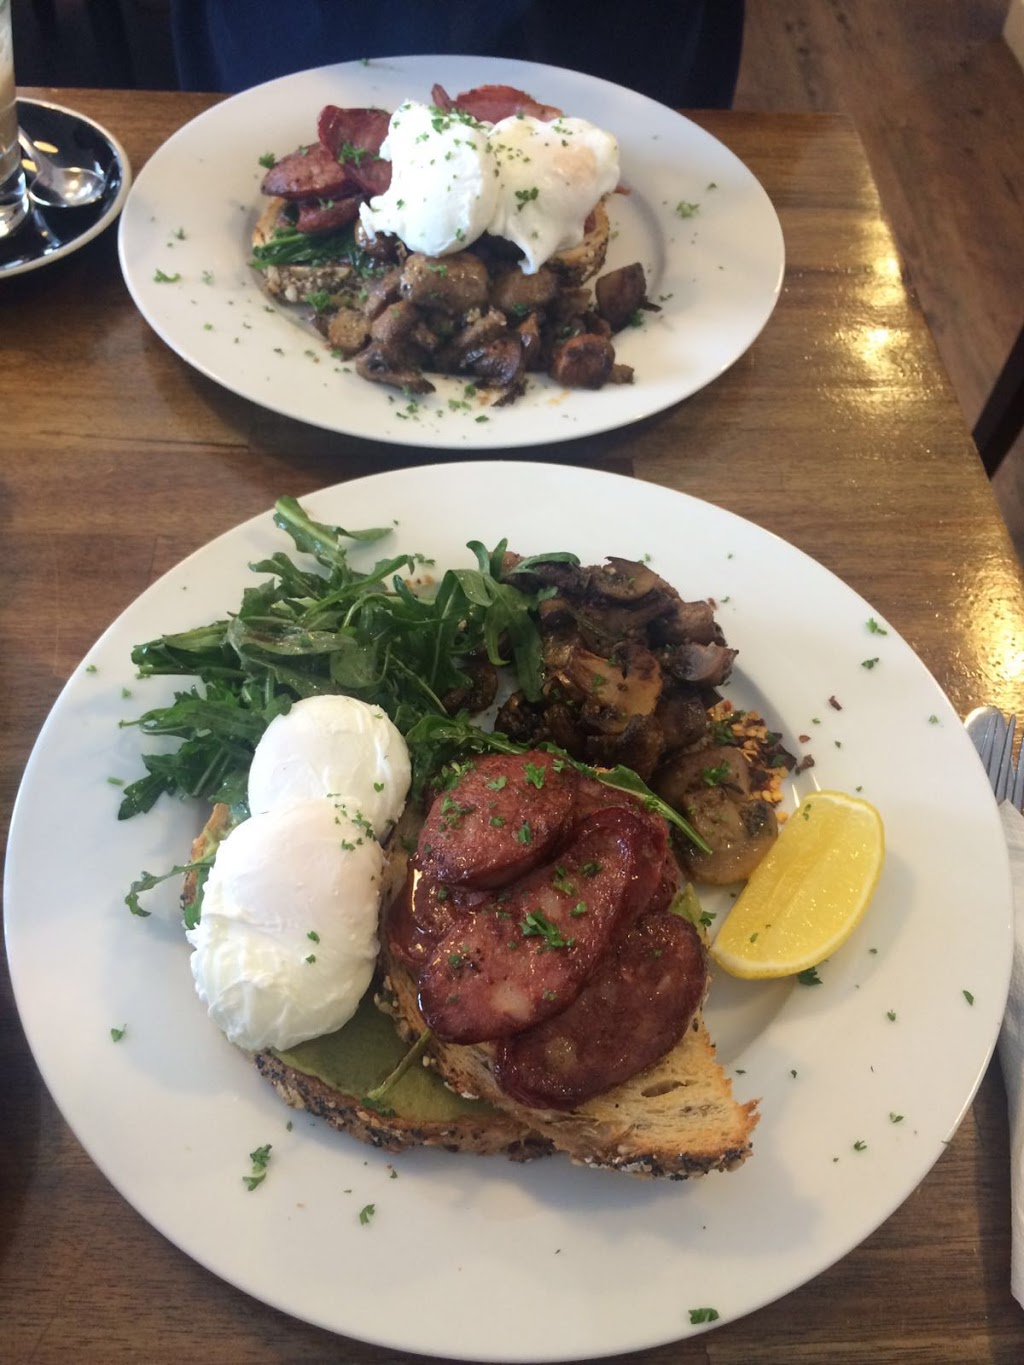 The Jolimont | cafe | 73 Jolimont Rd, Forest Hill VIC 3131, Australia | 0438333595 OR +61 438 333 595